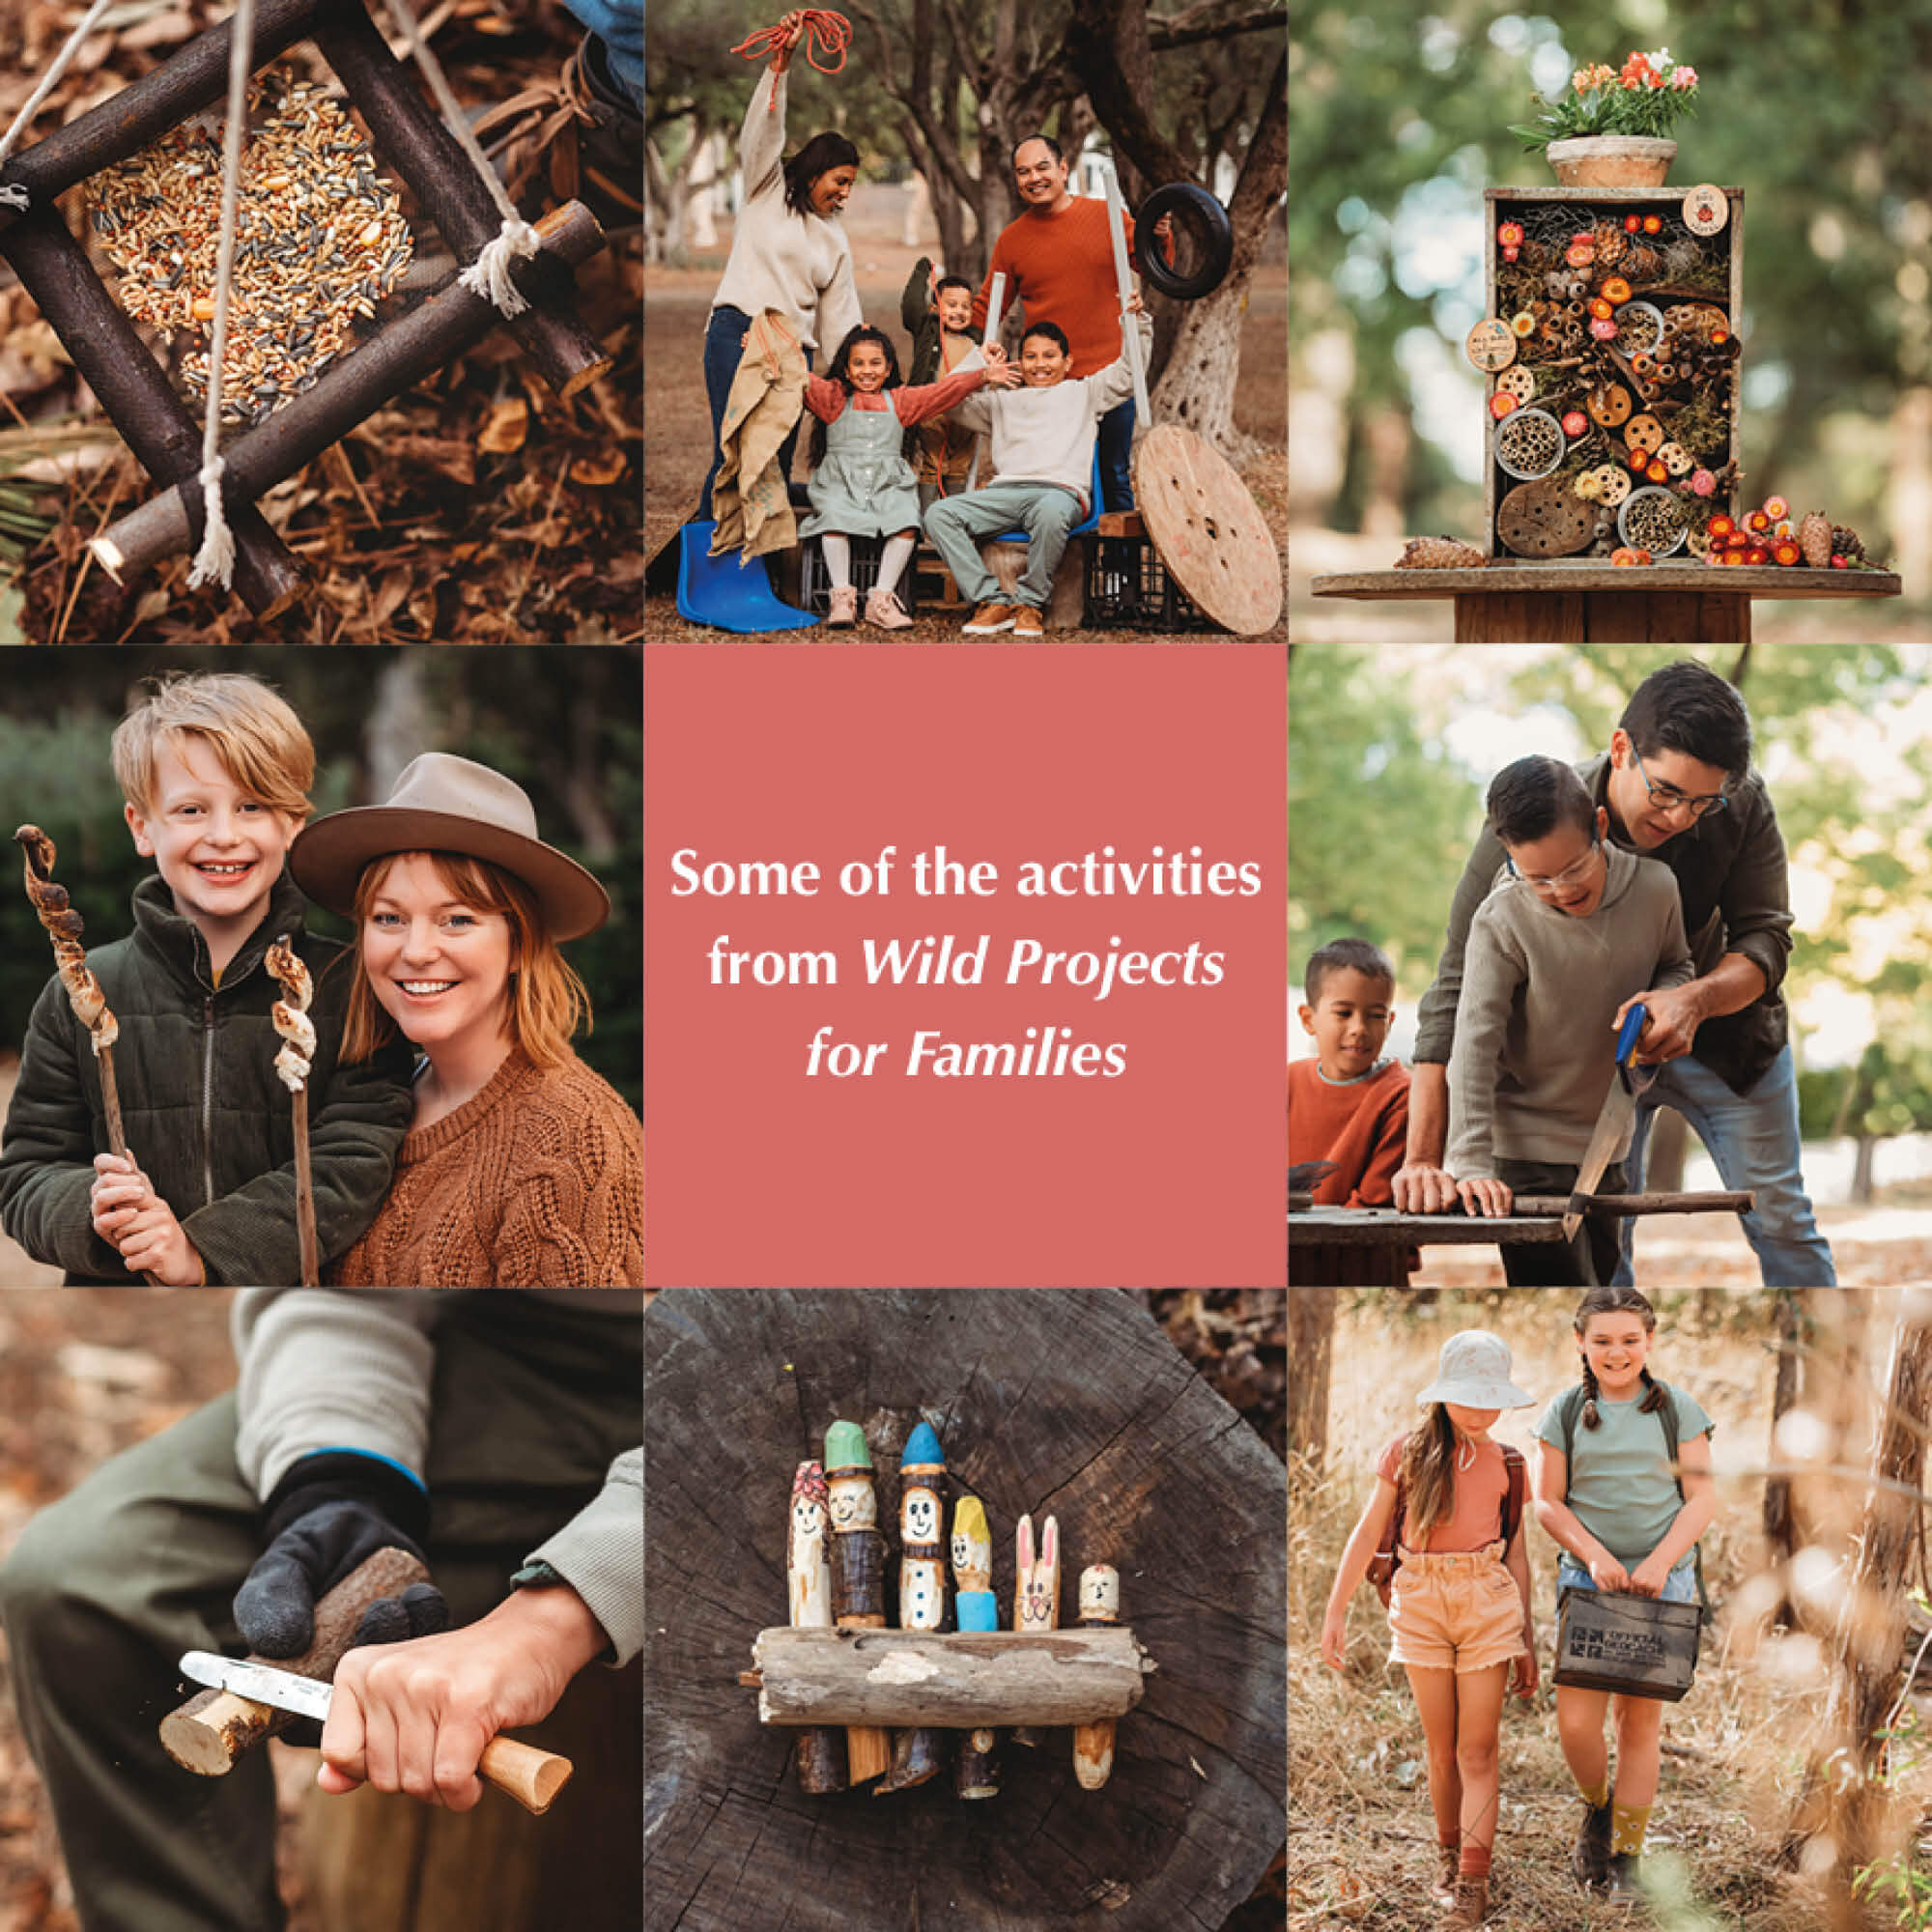 Selection of activities from the book Wild Projects for Families, includes bird feeder, floor is lava, bug hotel, damper sticks, ring toss, stick family and geocaching.